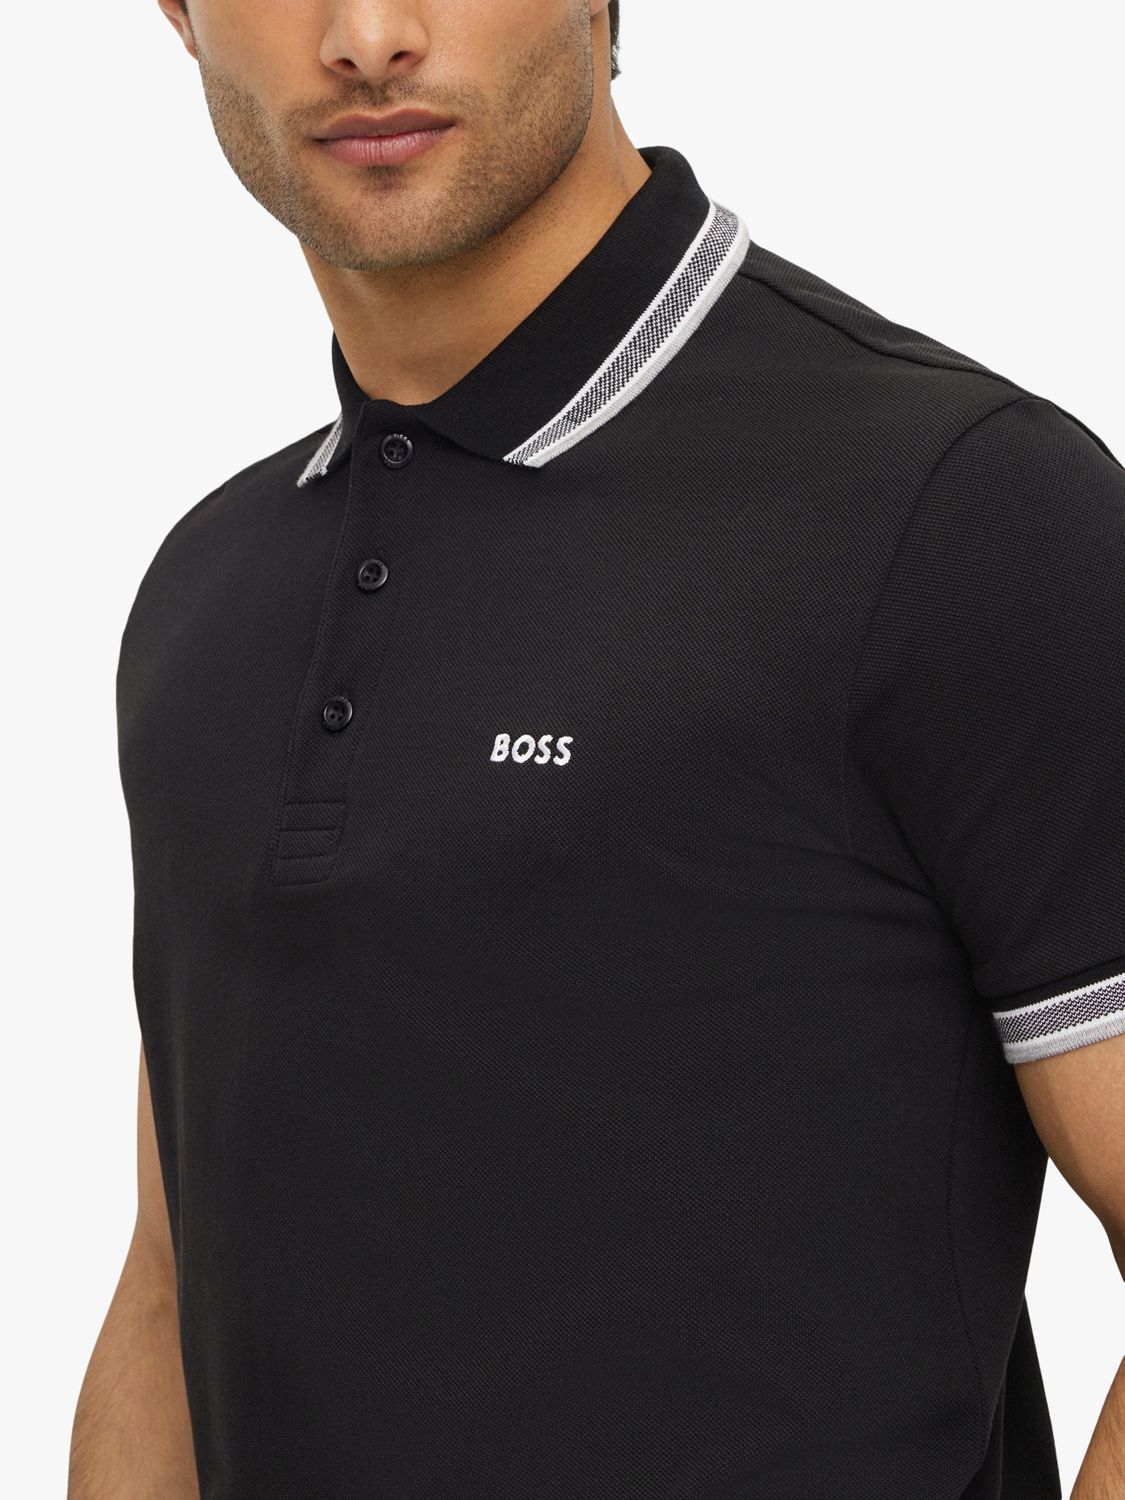 Buy BOSS Paddy Short Sleeve Polo Shirt Online at johnlewis.com